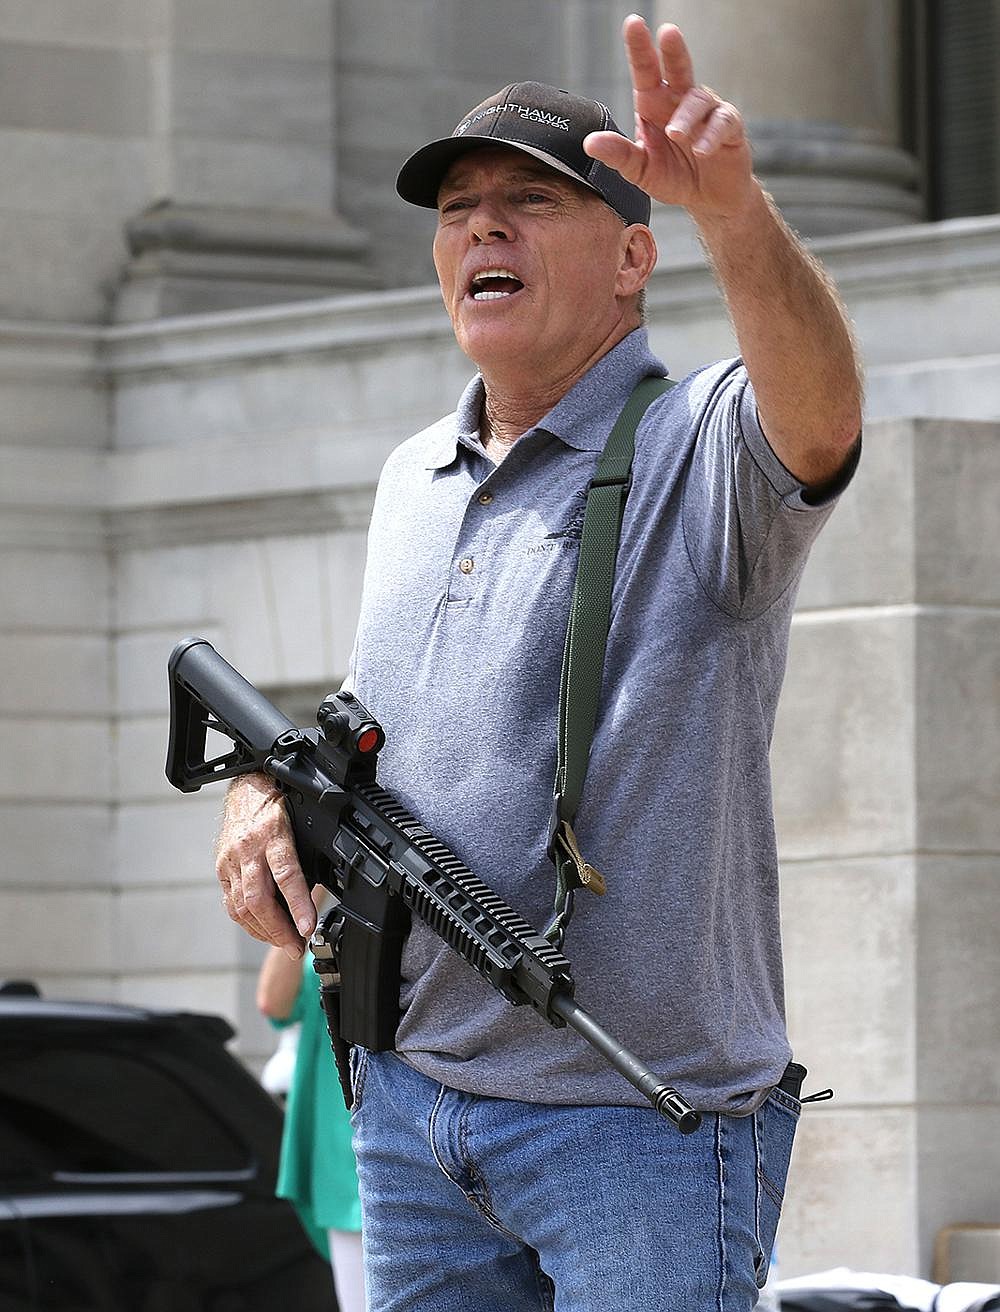 Robert “Bigo” Barnett talks to the crowd during a rally Sept. 3 at the state Capitol after an announcement by Rep. Dan Sullivan, R-Jonesboro, of a lawsuit aimed at overturning Gov. Asa Hutchinson’s state of emergency as well as his administration’s public health directives relating to the pandemic.
(Arkansas Democrat-Gazette/Thomas Metthe)